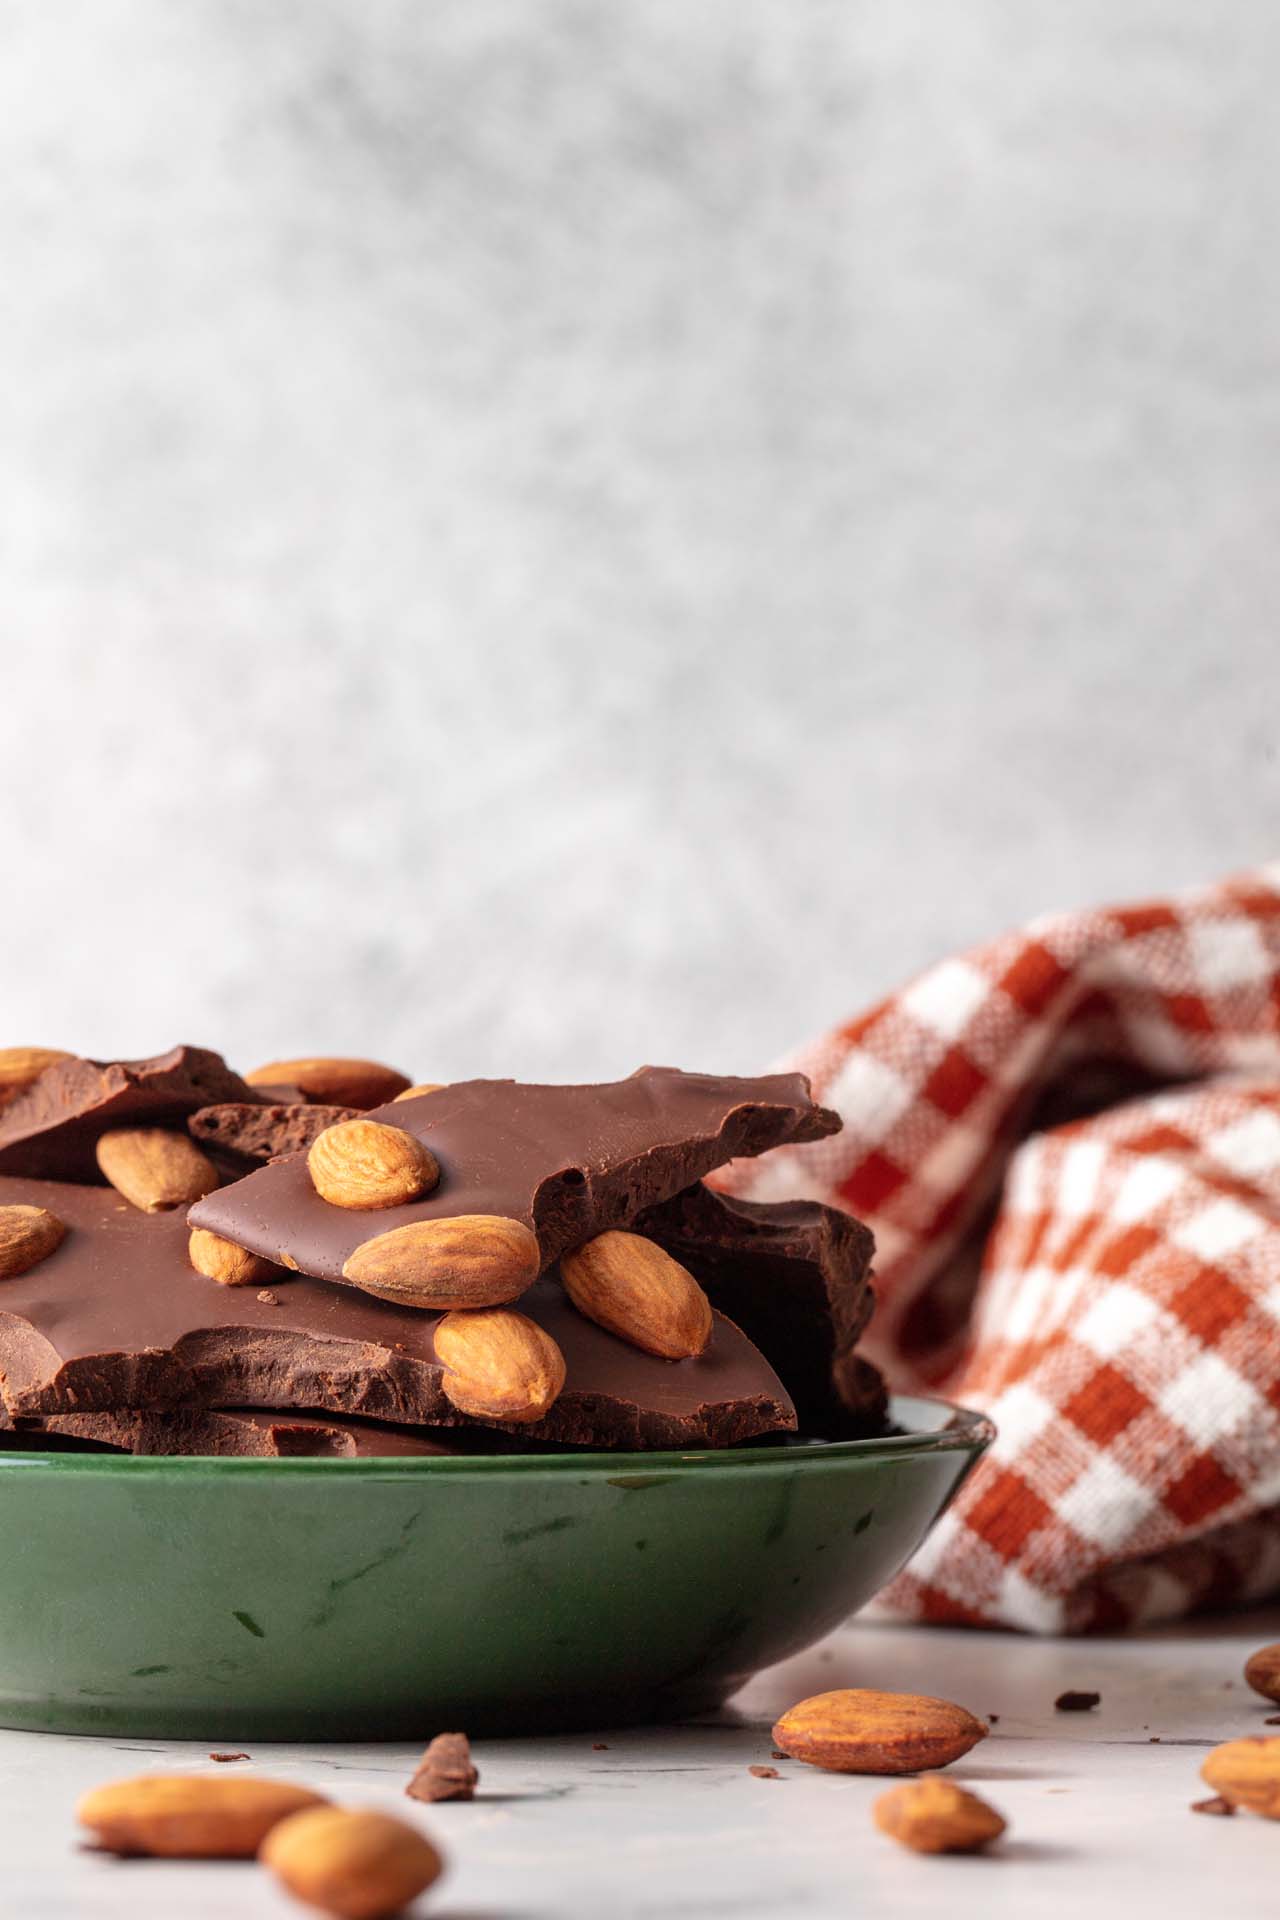 Bowl of Chocolate Bark Made with Whole Almonds -Baked Goods and Confections